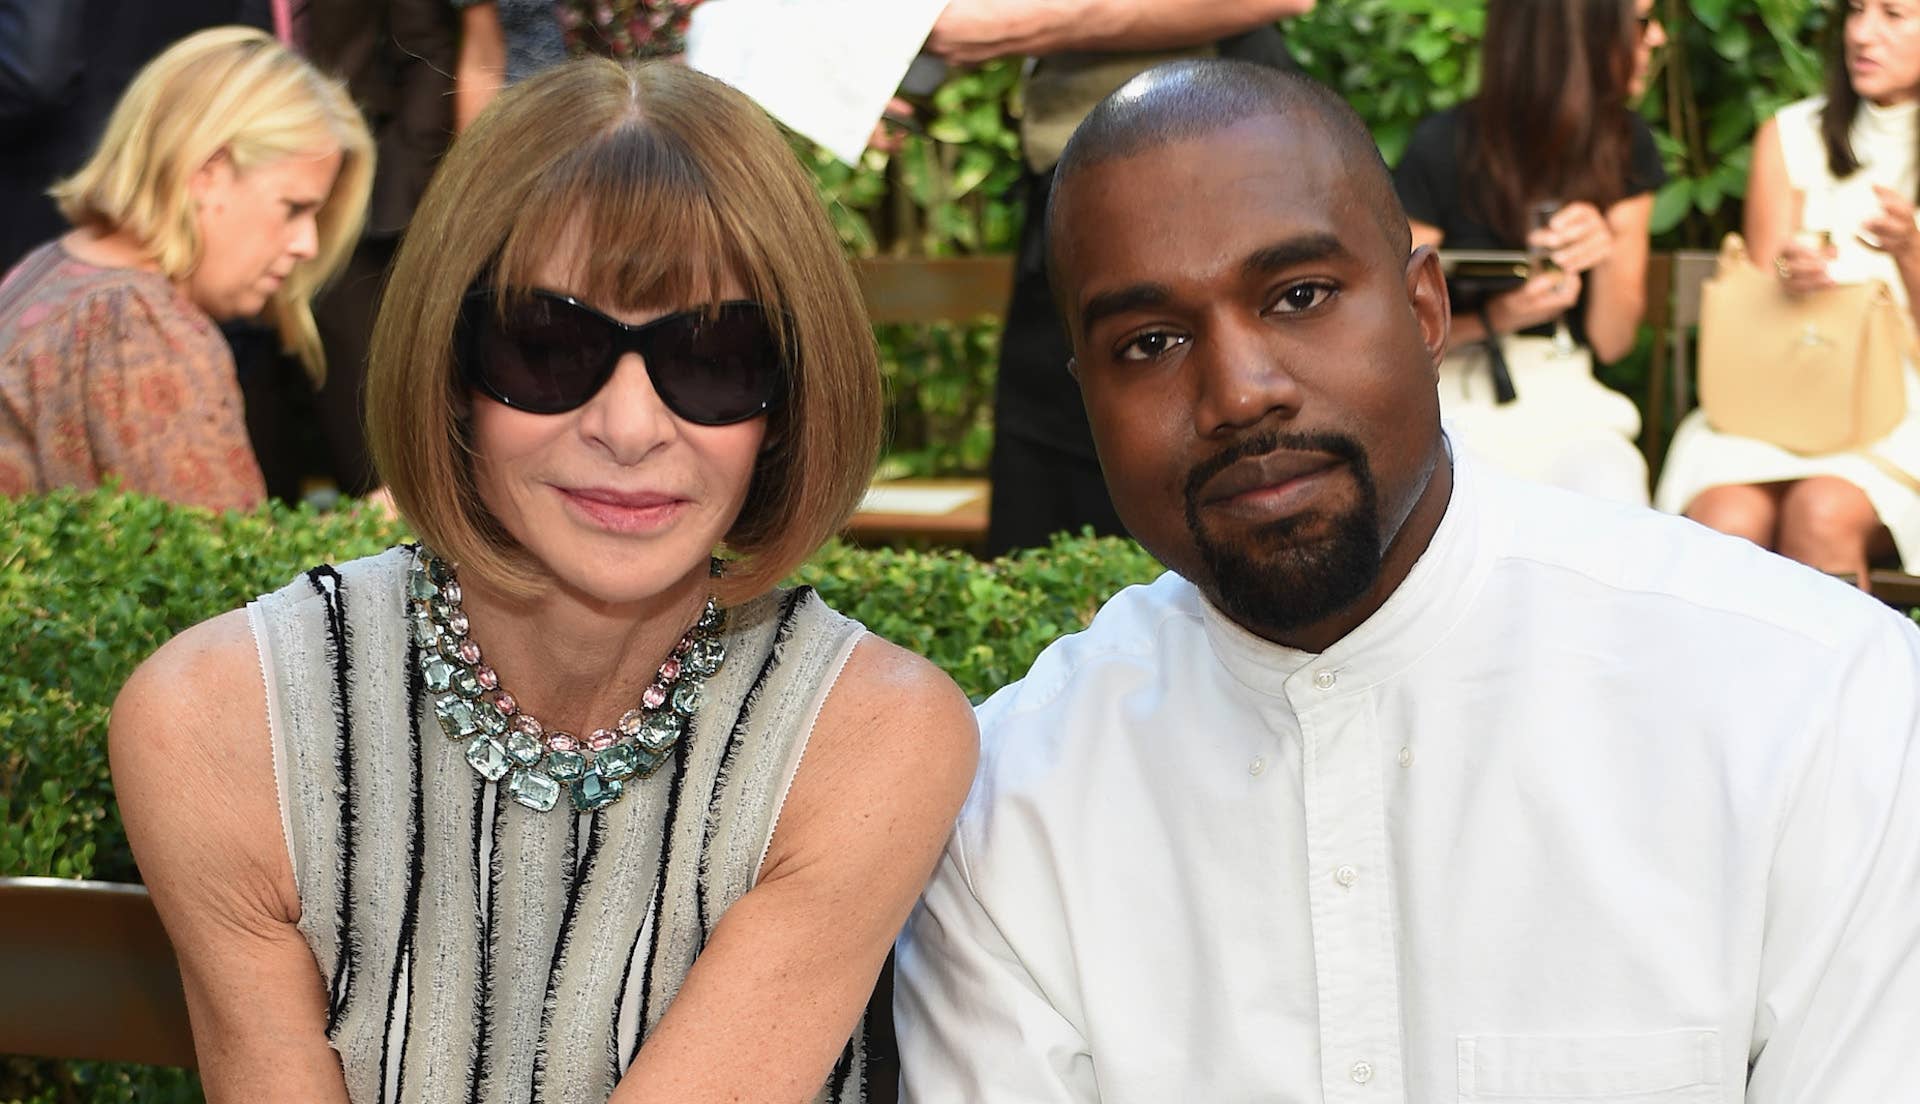 Anna Mintour and Kanye West